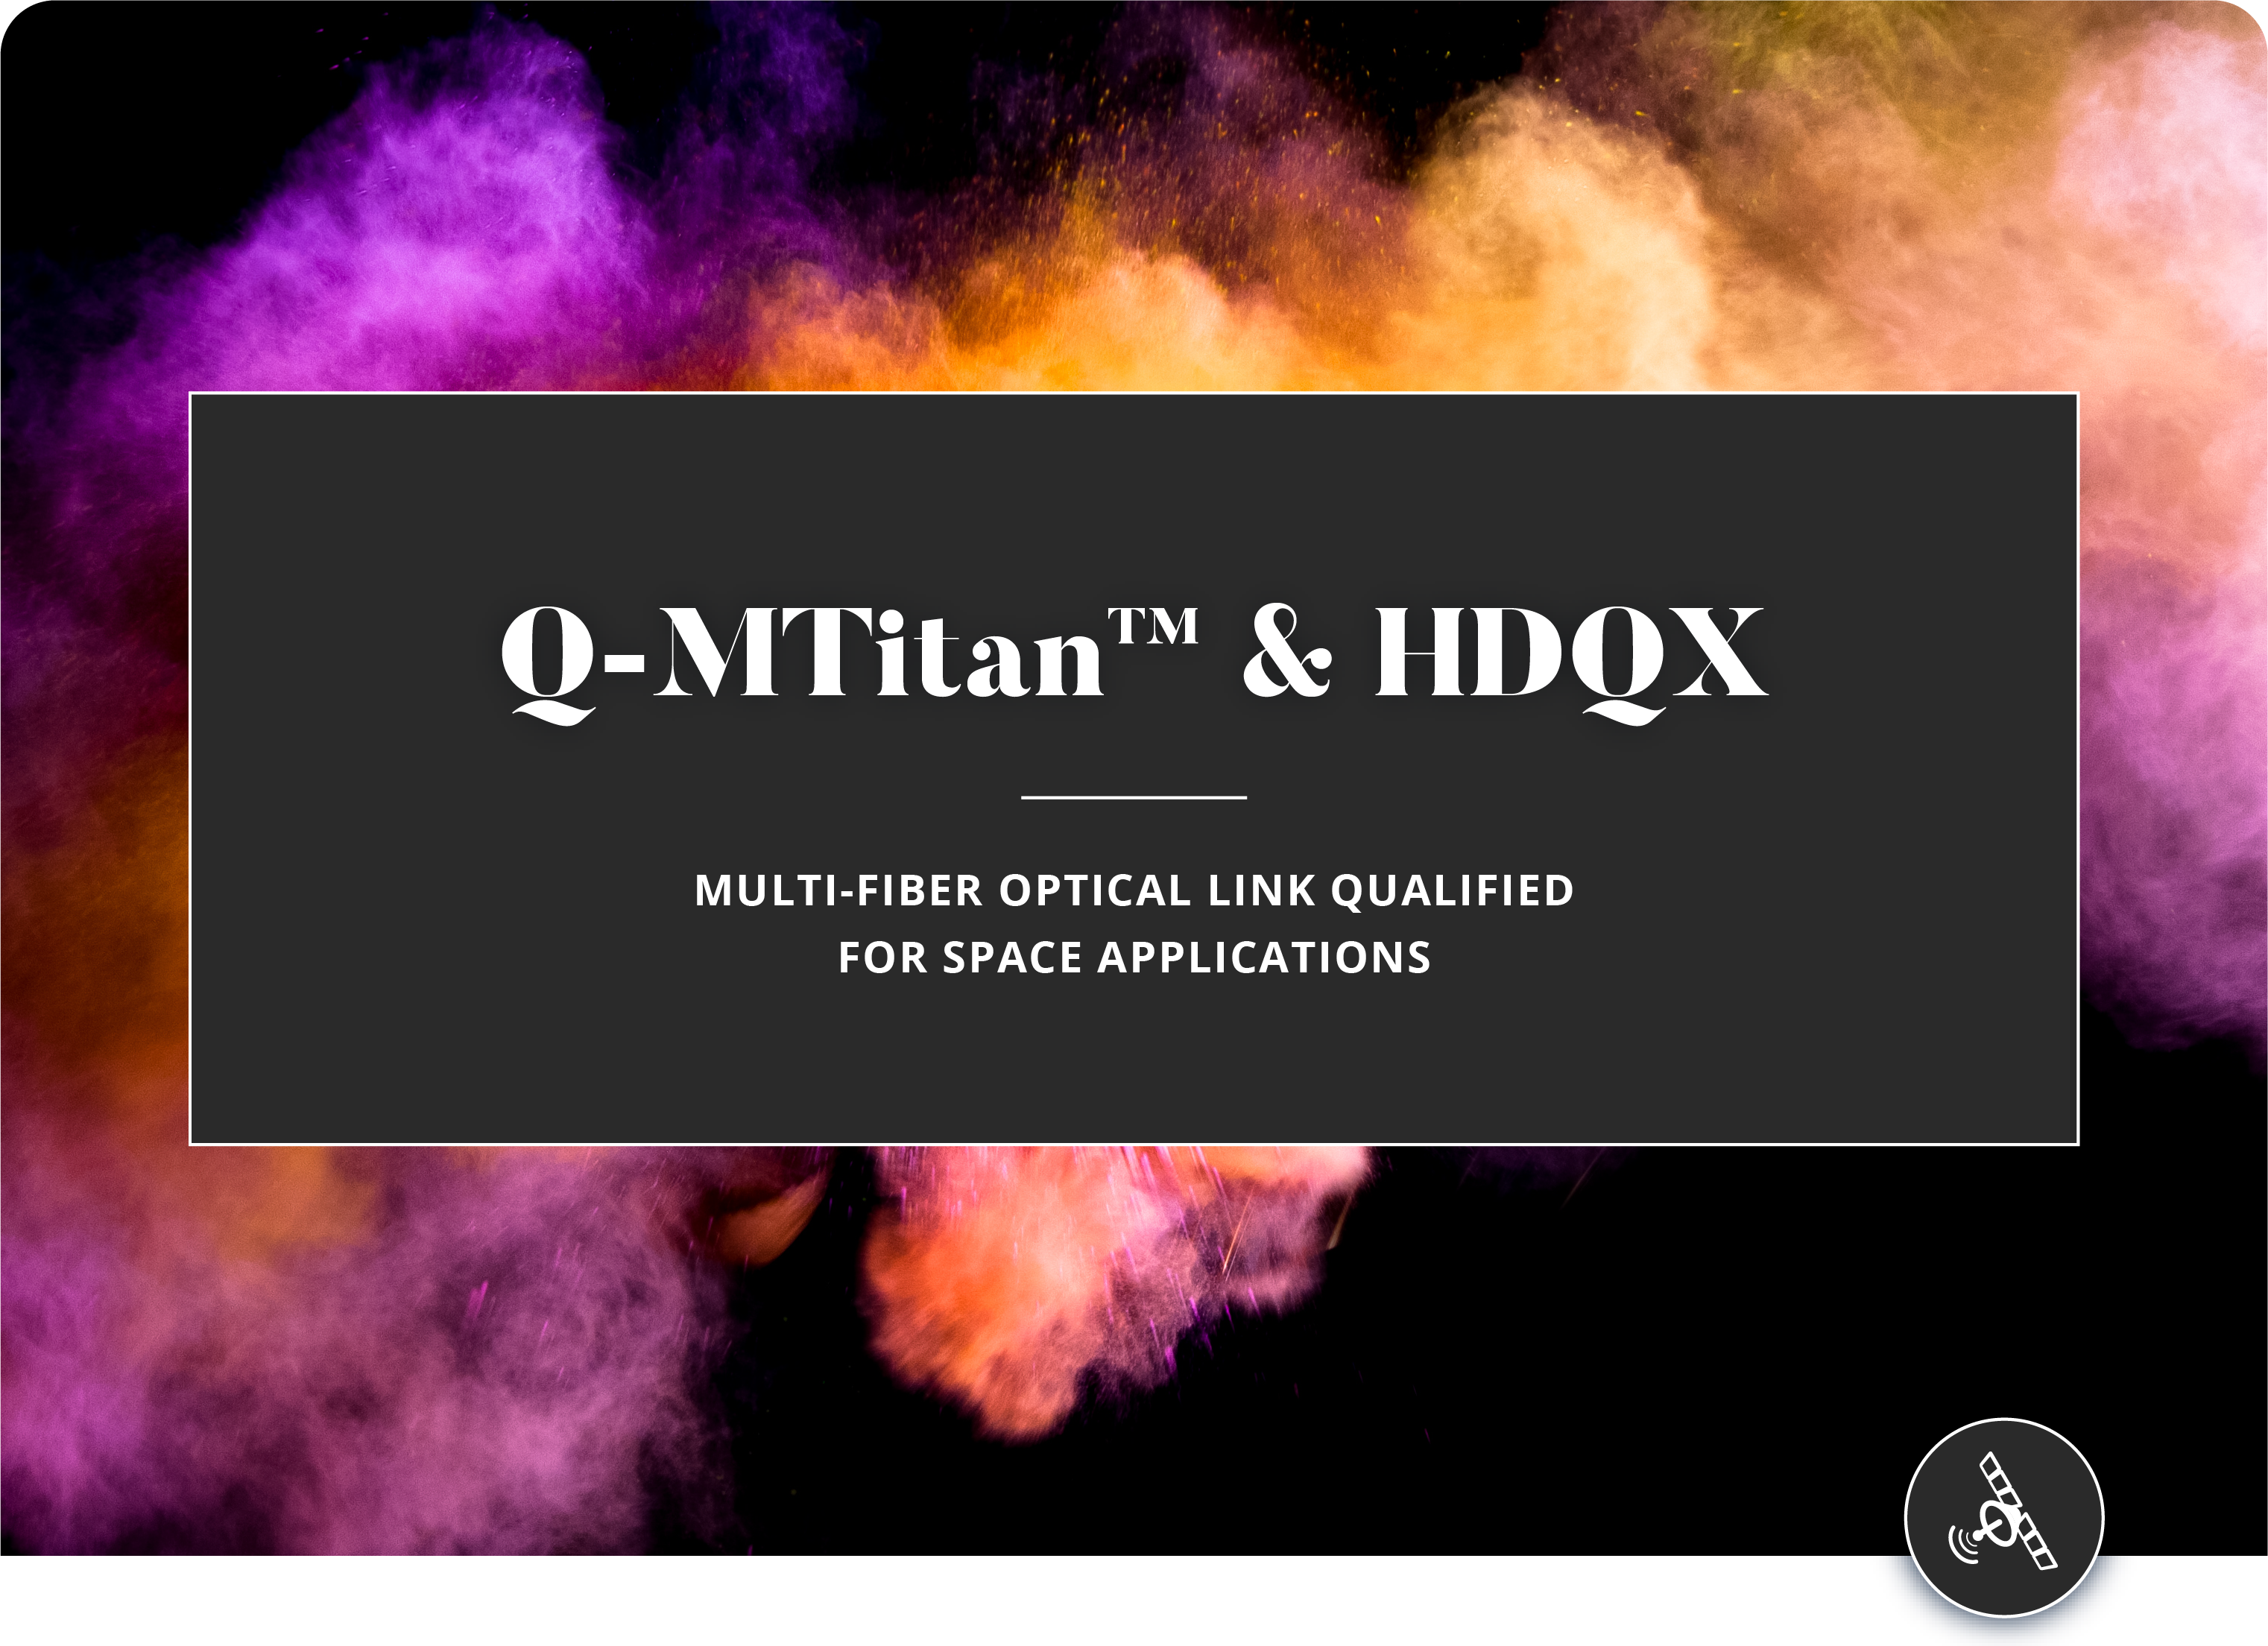 Multi-fiber Optical Link for Space Applications